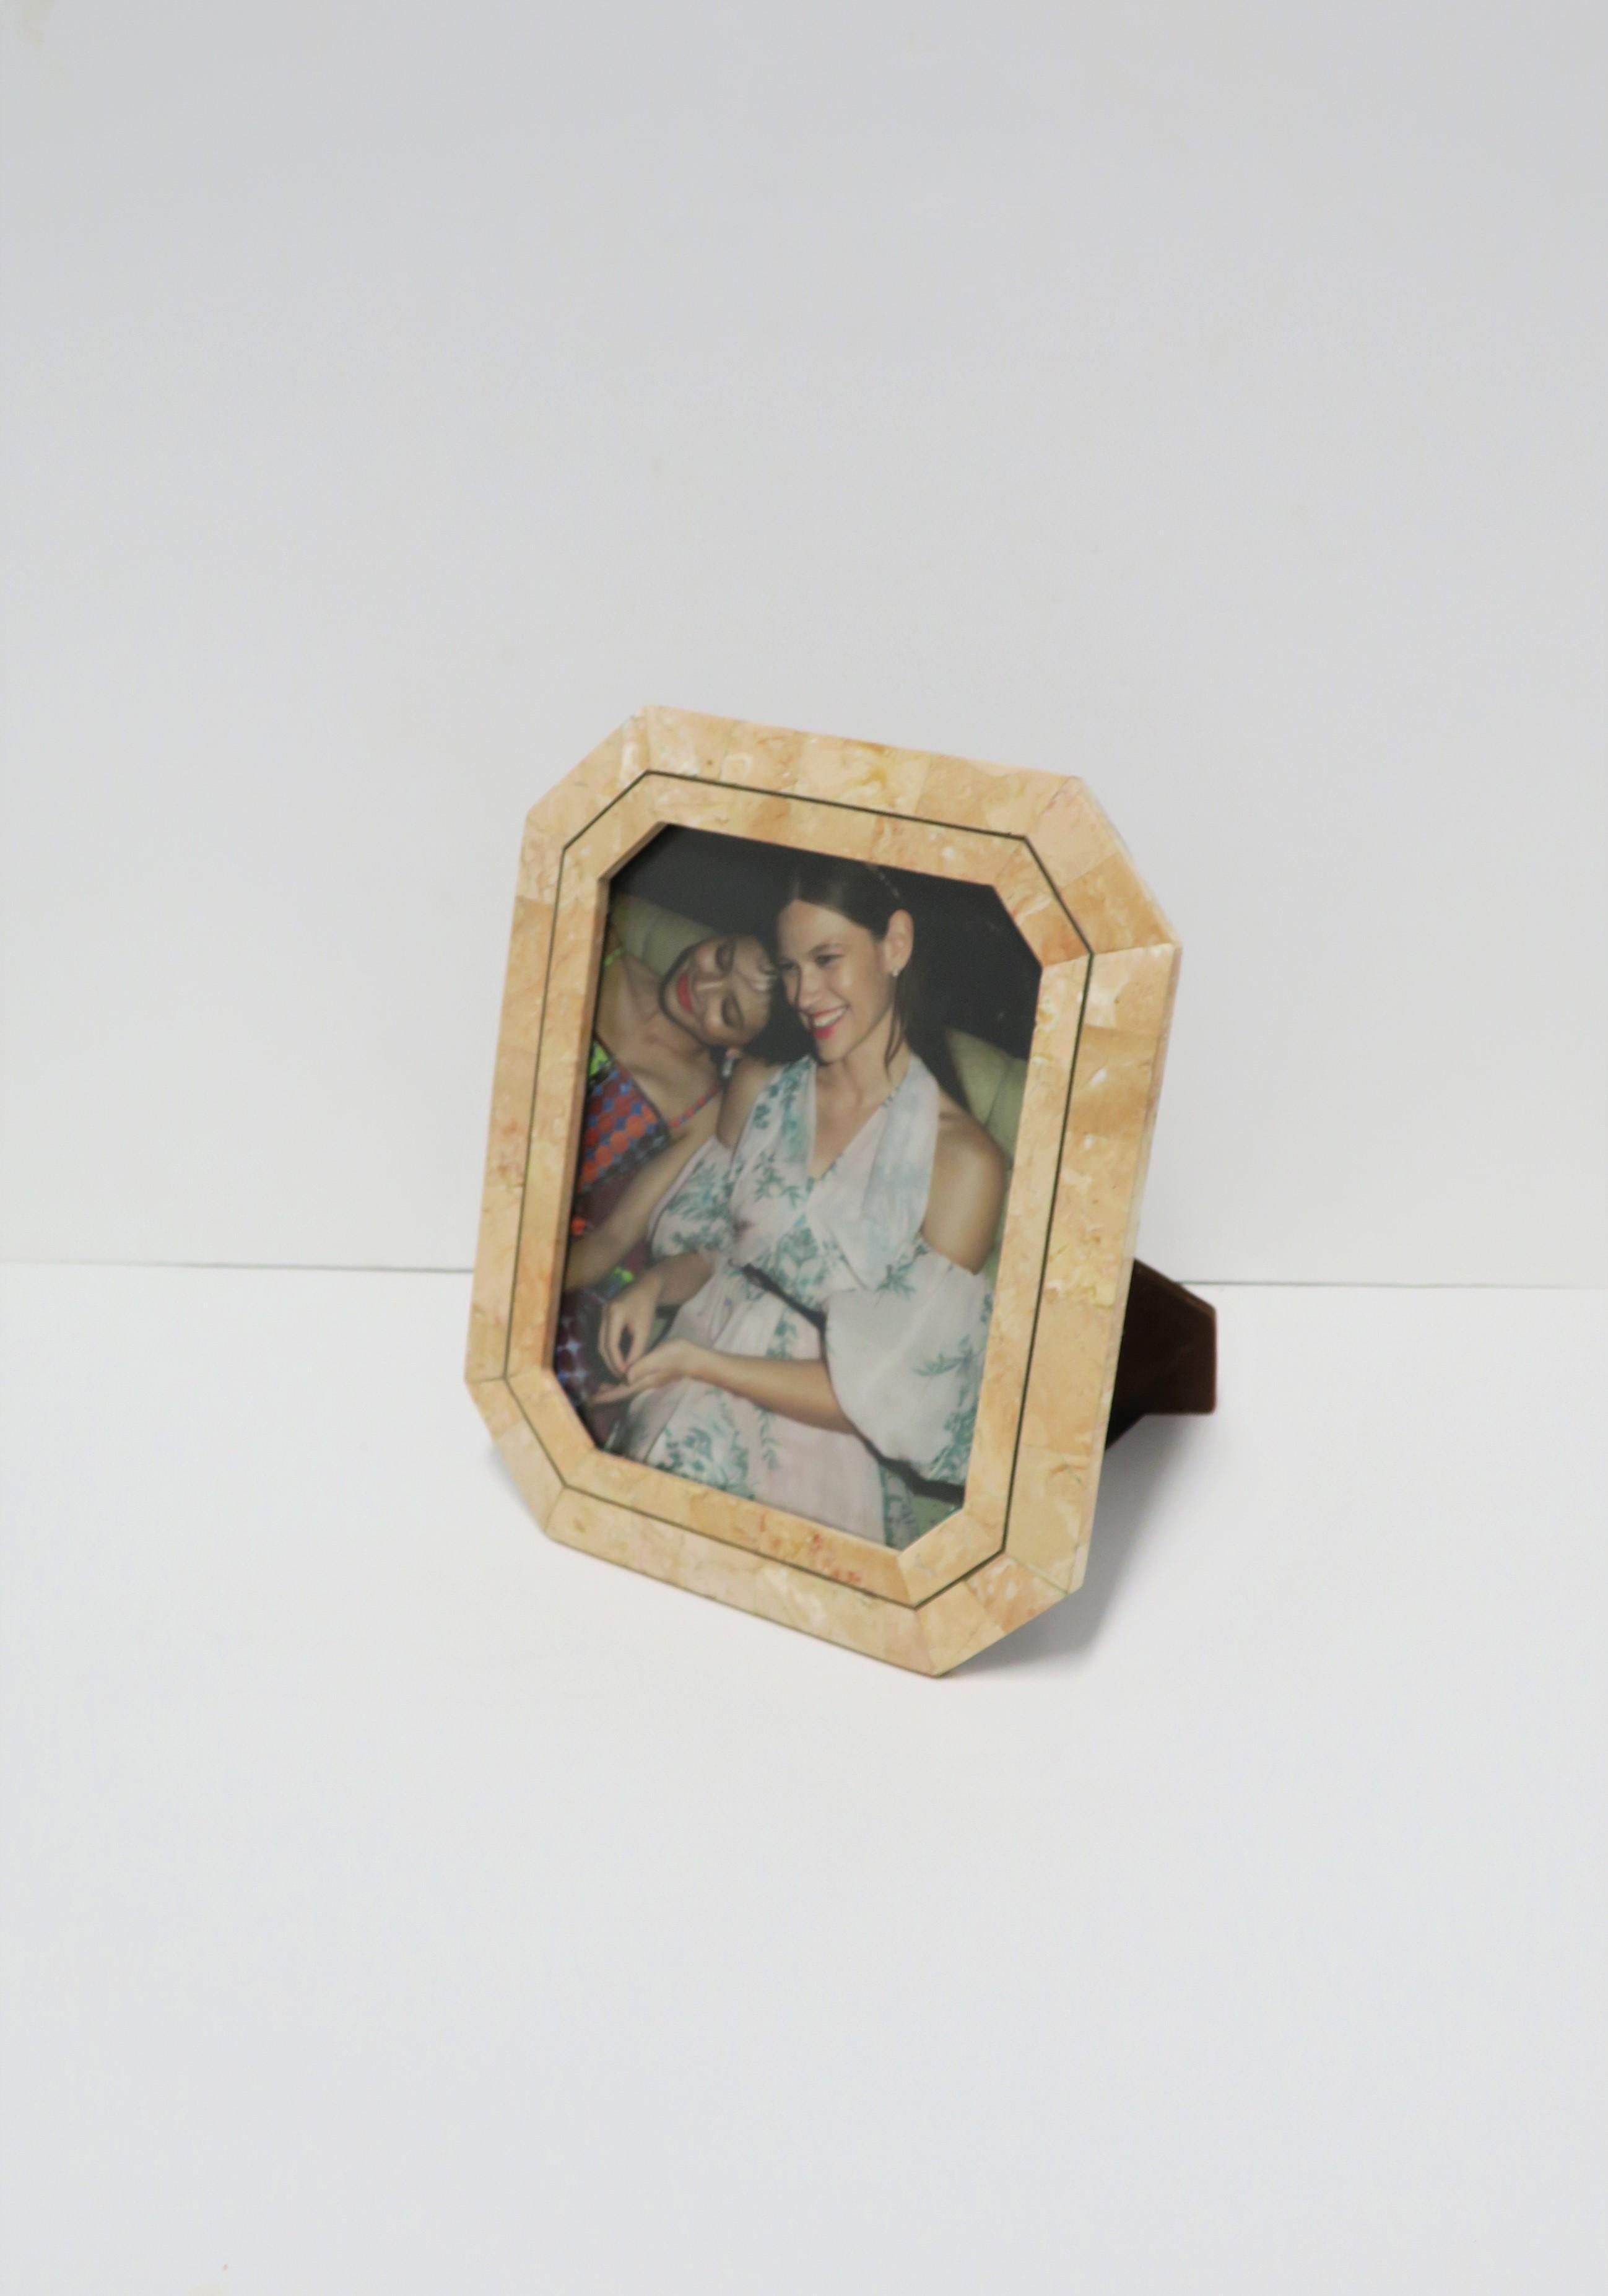 A beautiful '80s marble and brass picture frame by designer Maitland-Smith, circa late-20th century, 1980s. Frame is rectangular/octagonal in shape, and marble in shades of salmon pink and touches of light beige with thin brass detail around. Back